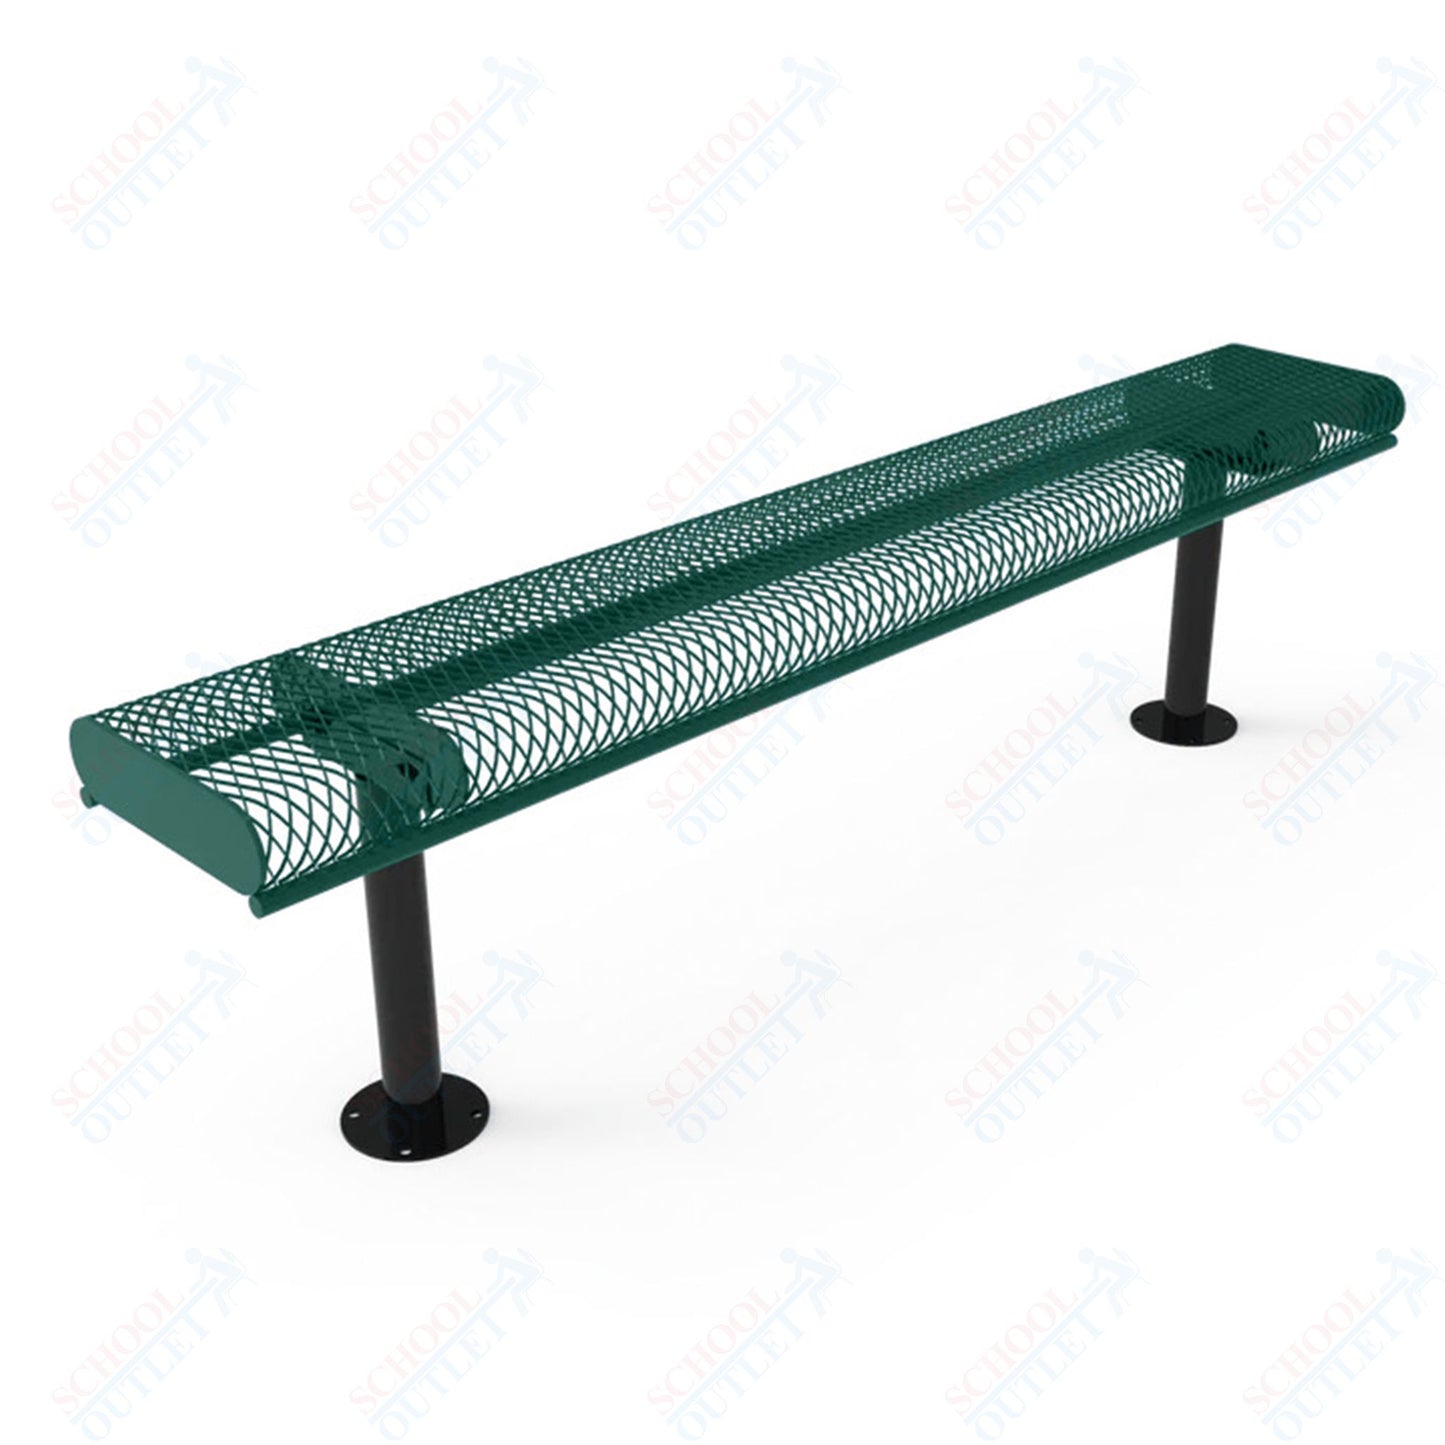 MyTcoat - Rolled Edges Outdoor Bench without Back 6' L - Surface Mount (MYT-BRE06-23)